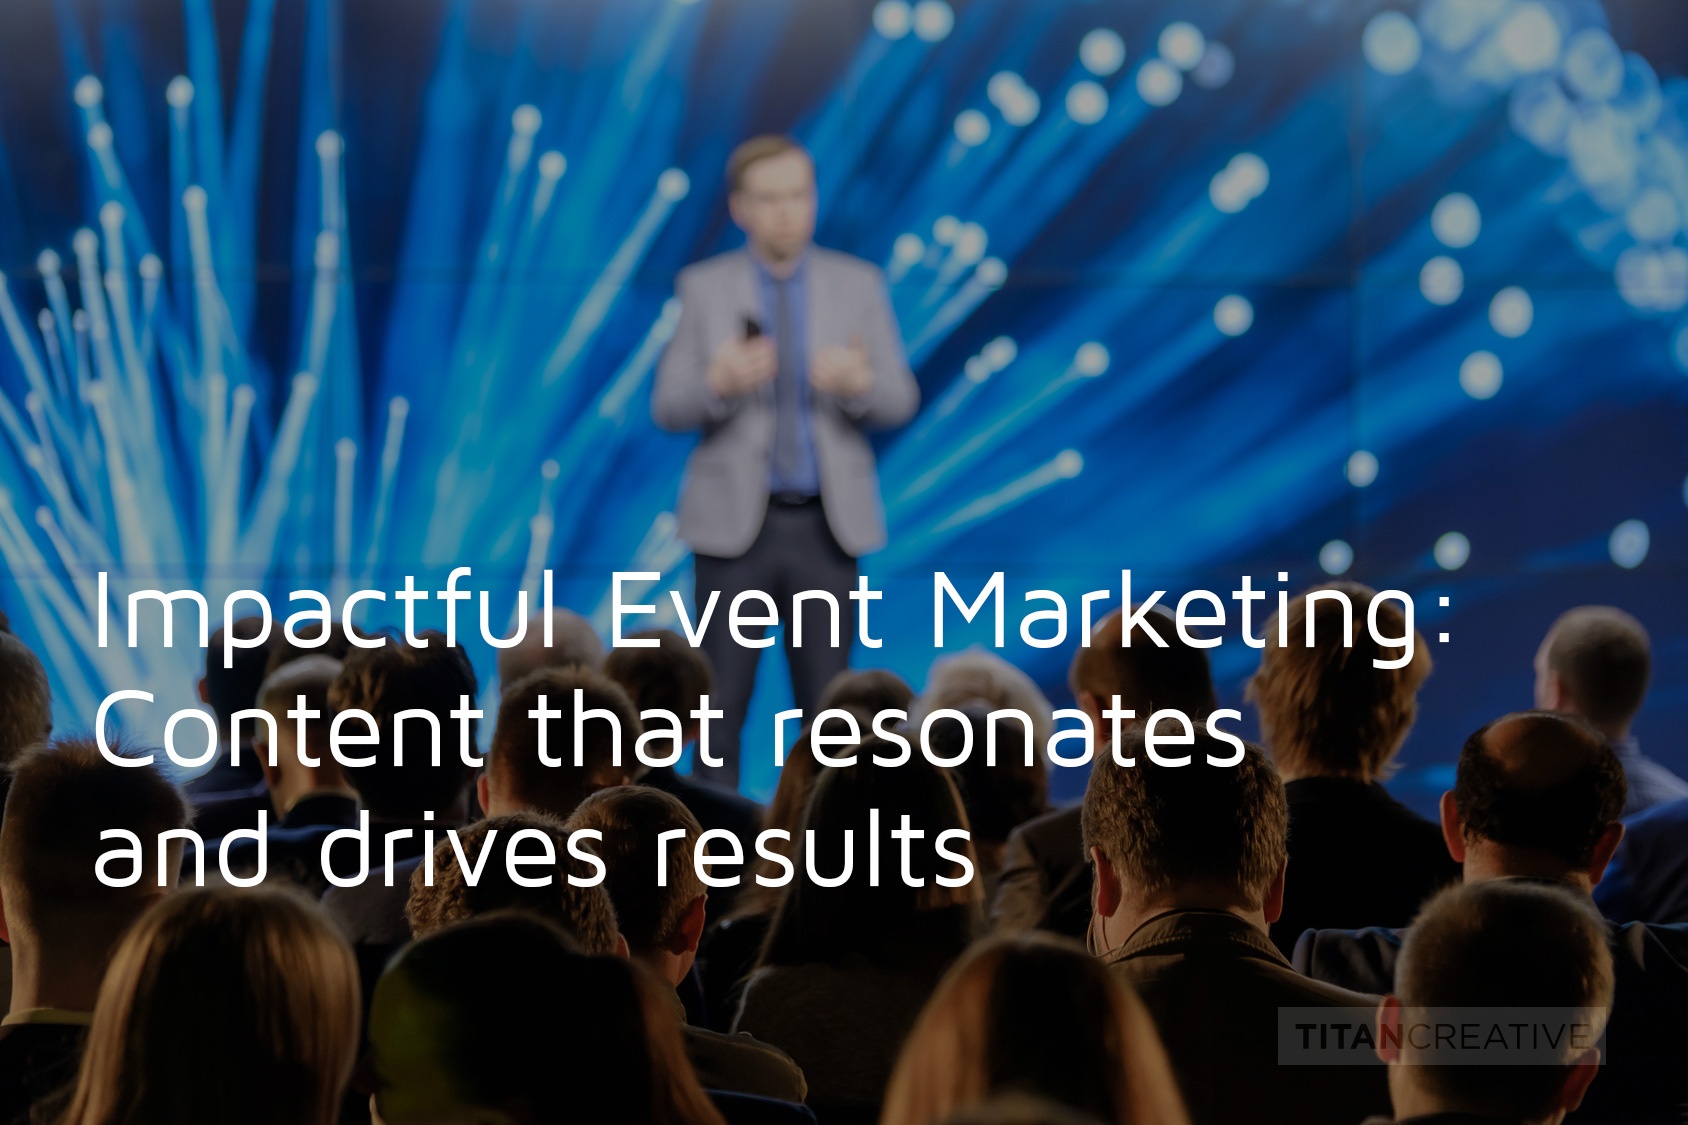 Impactful Event Marketing: Content that resonates and drives results